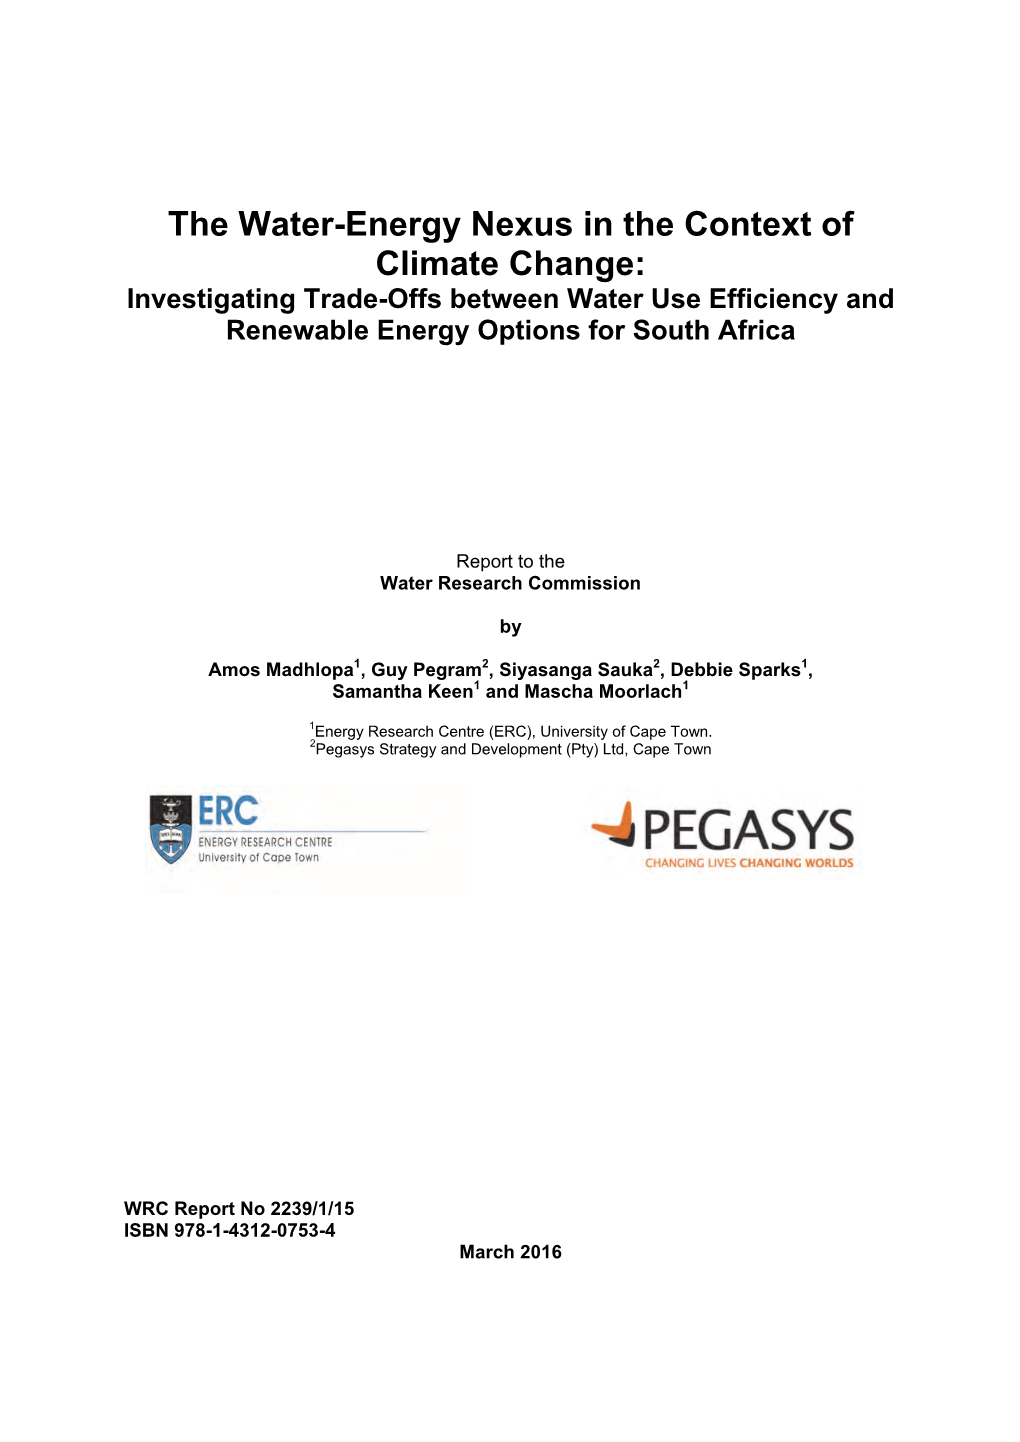 The Water-Energy Nexus in the Context of Climate Change: Investigating Trade-Offs Between Water Use Efficiency and Renewable Energy Options for South Africa